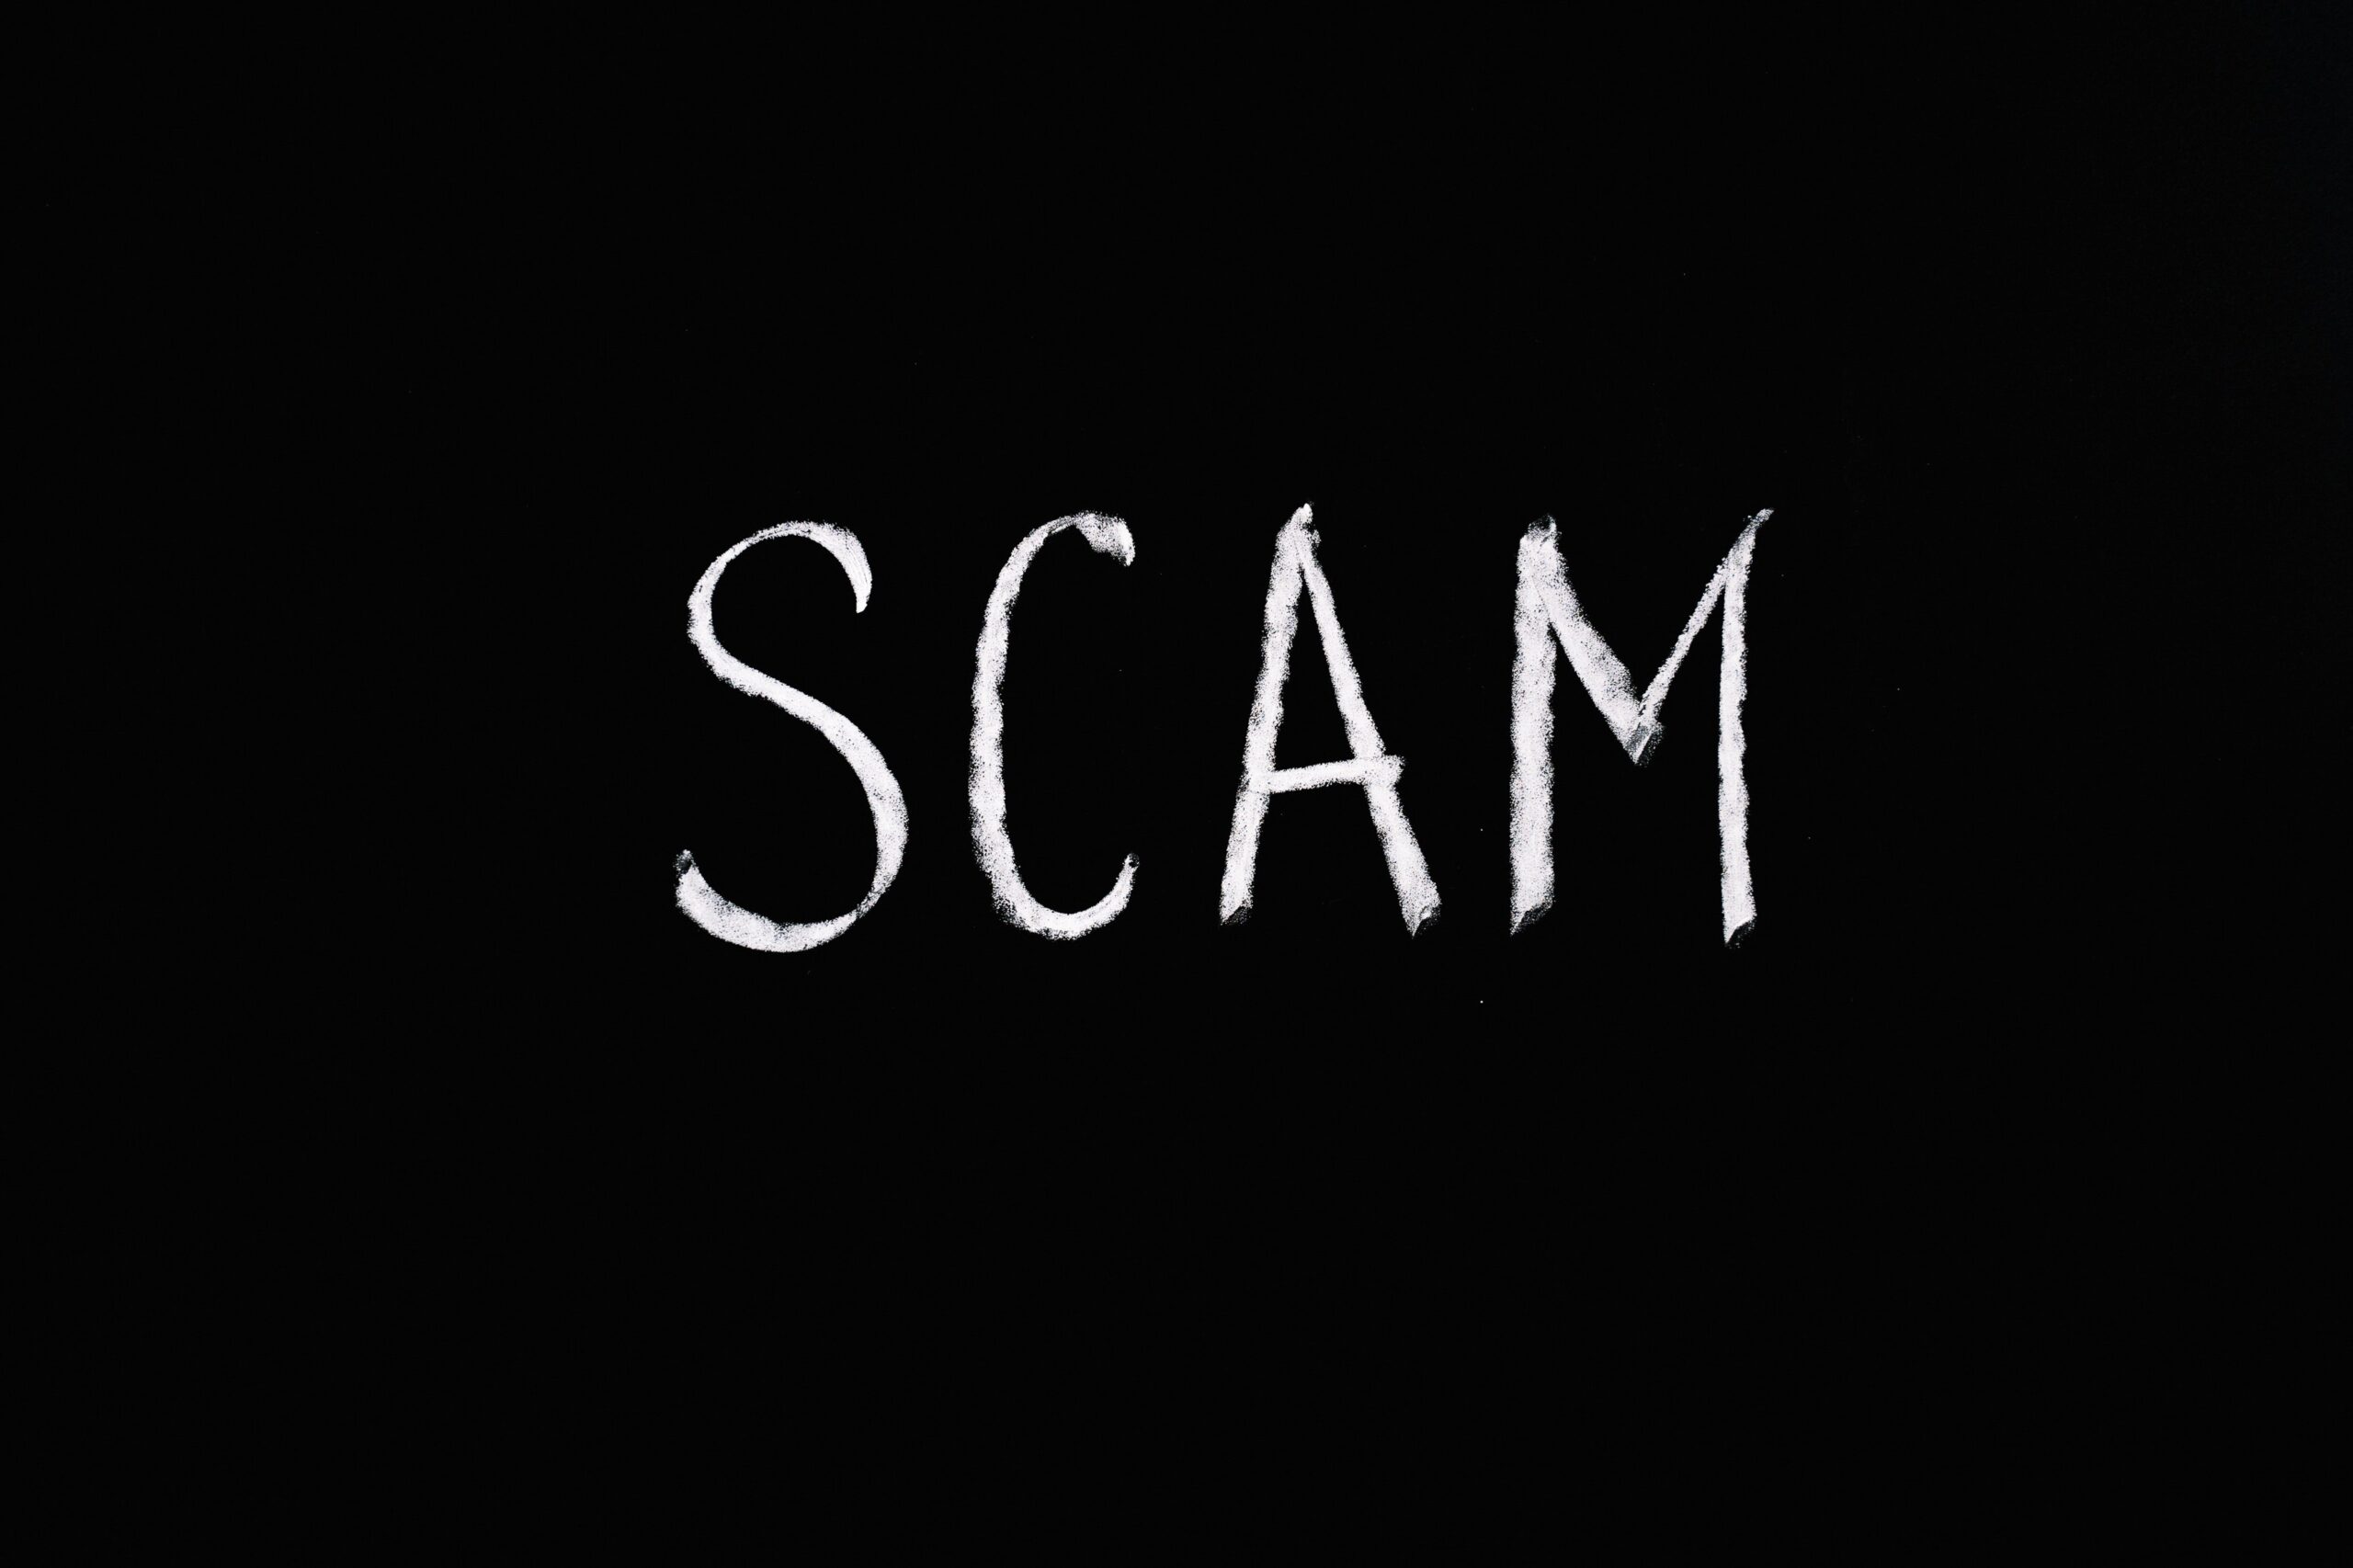 Scam on steam фото 77